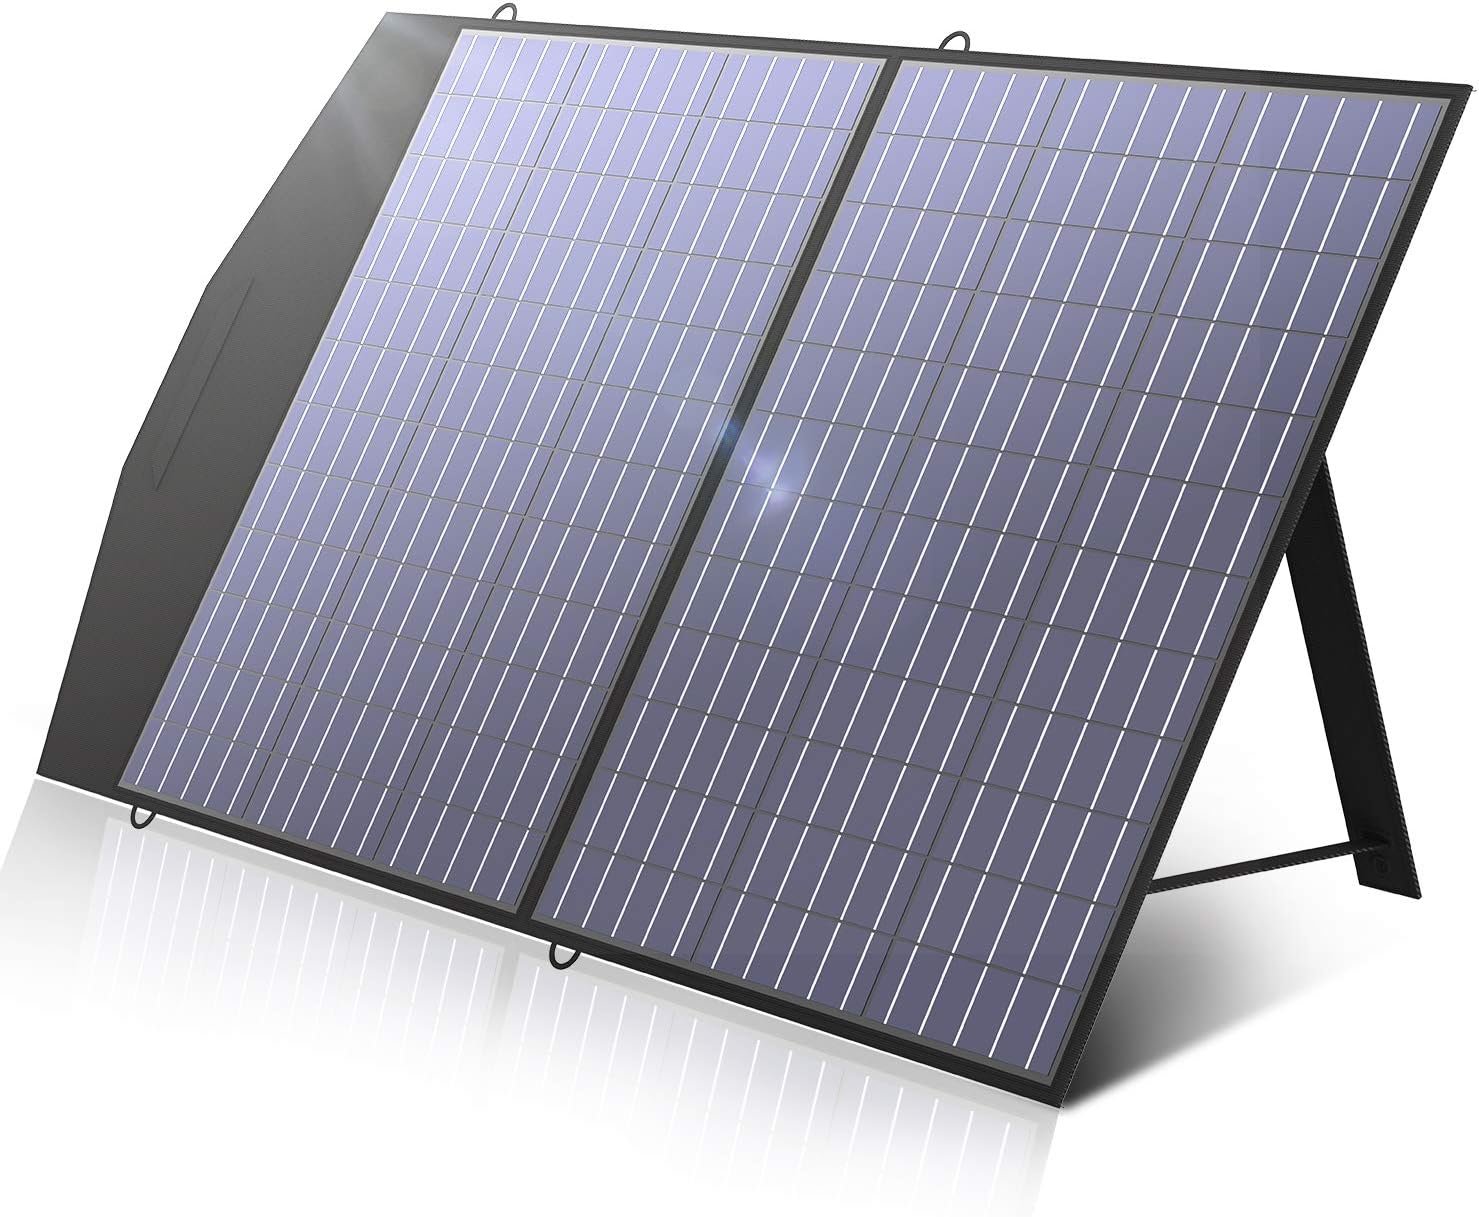 ALLPOWERS SP027 Foldable Solar Panel 100W Review